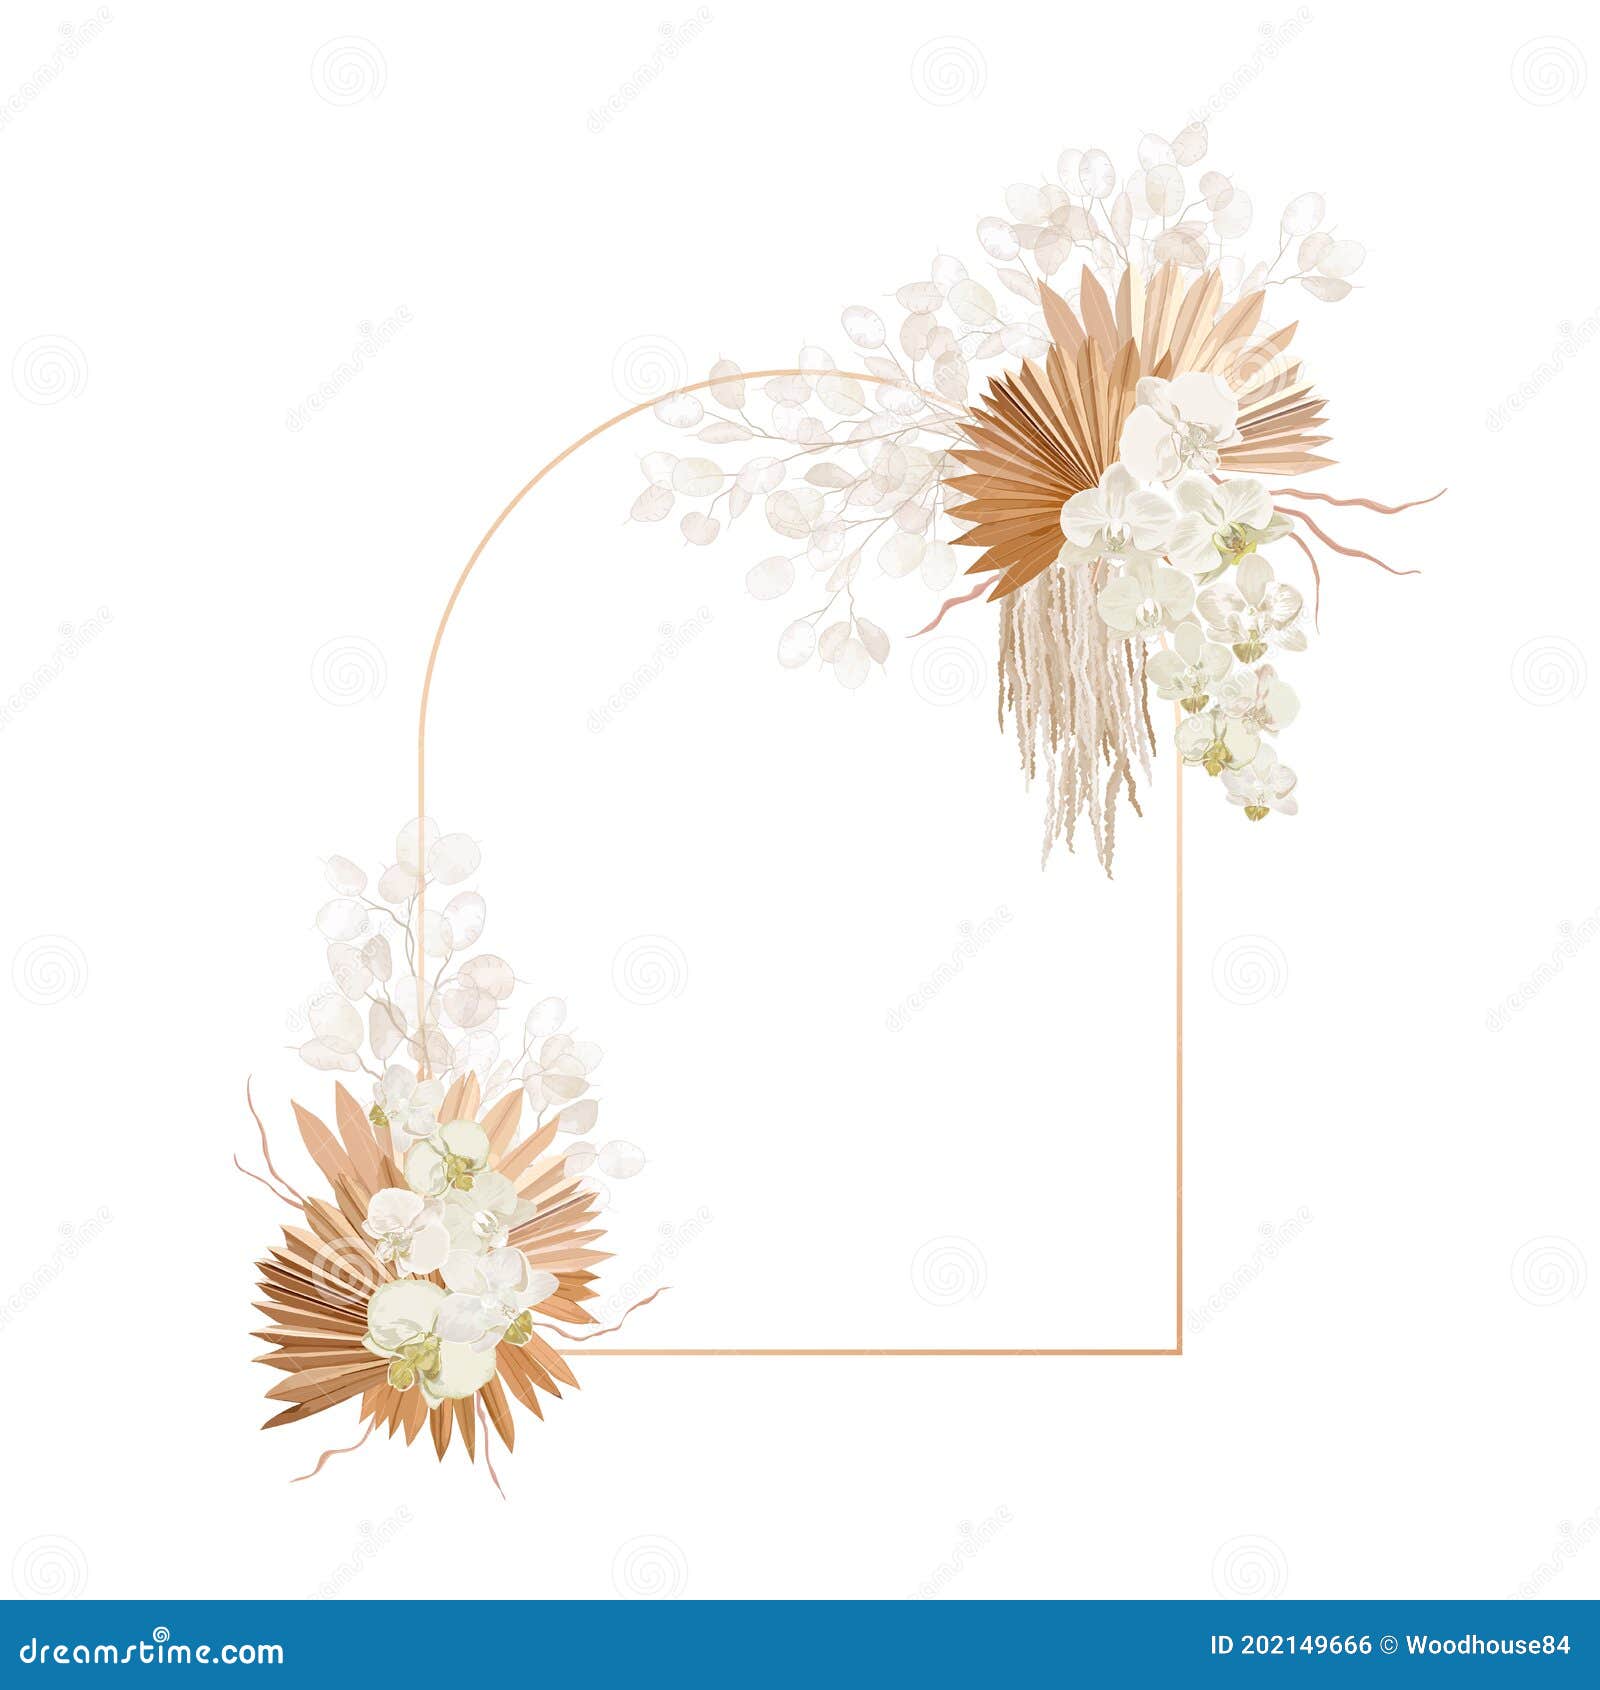 floral decoration  frame. dried lunaria, orchid, pampas grass wedding wreath. exotic dry flowers